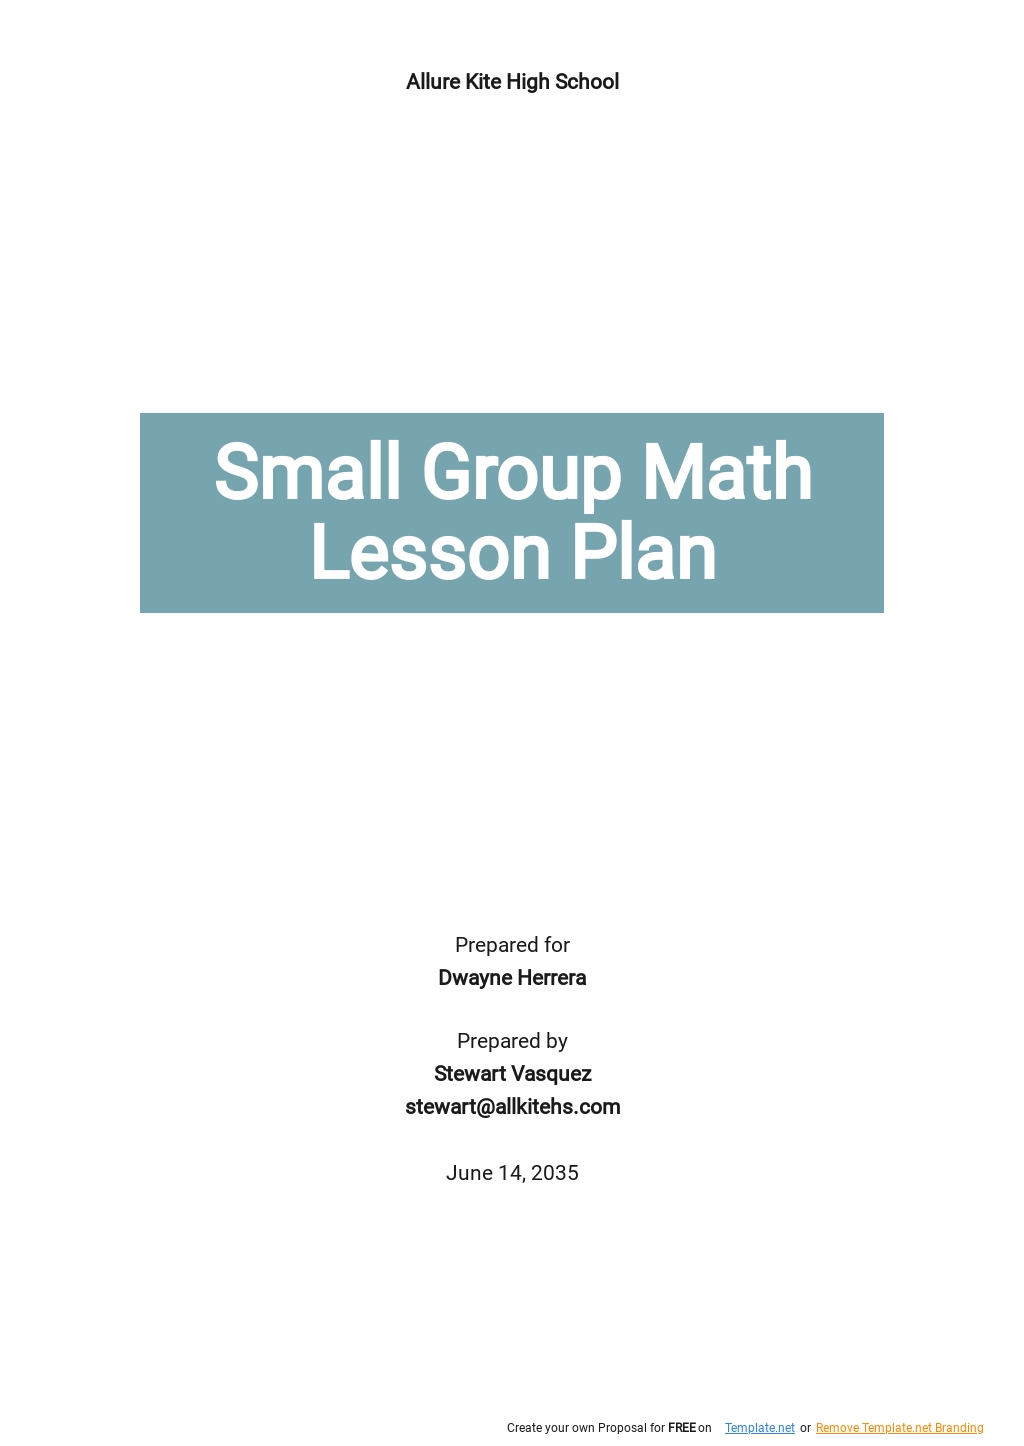 Small Group Math Lesson Plan Template.jpe